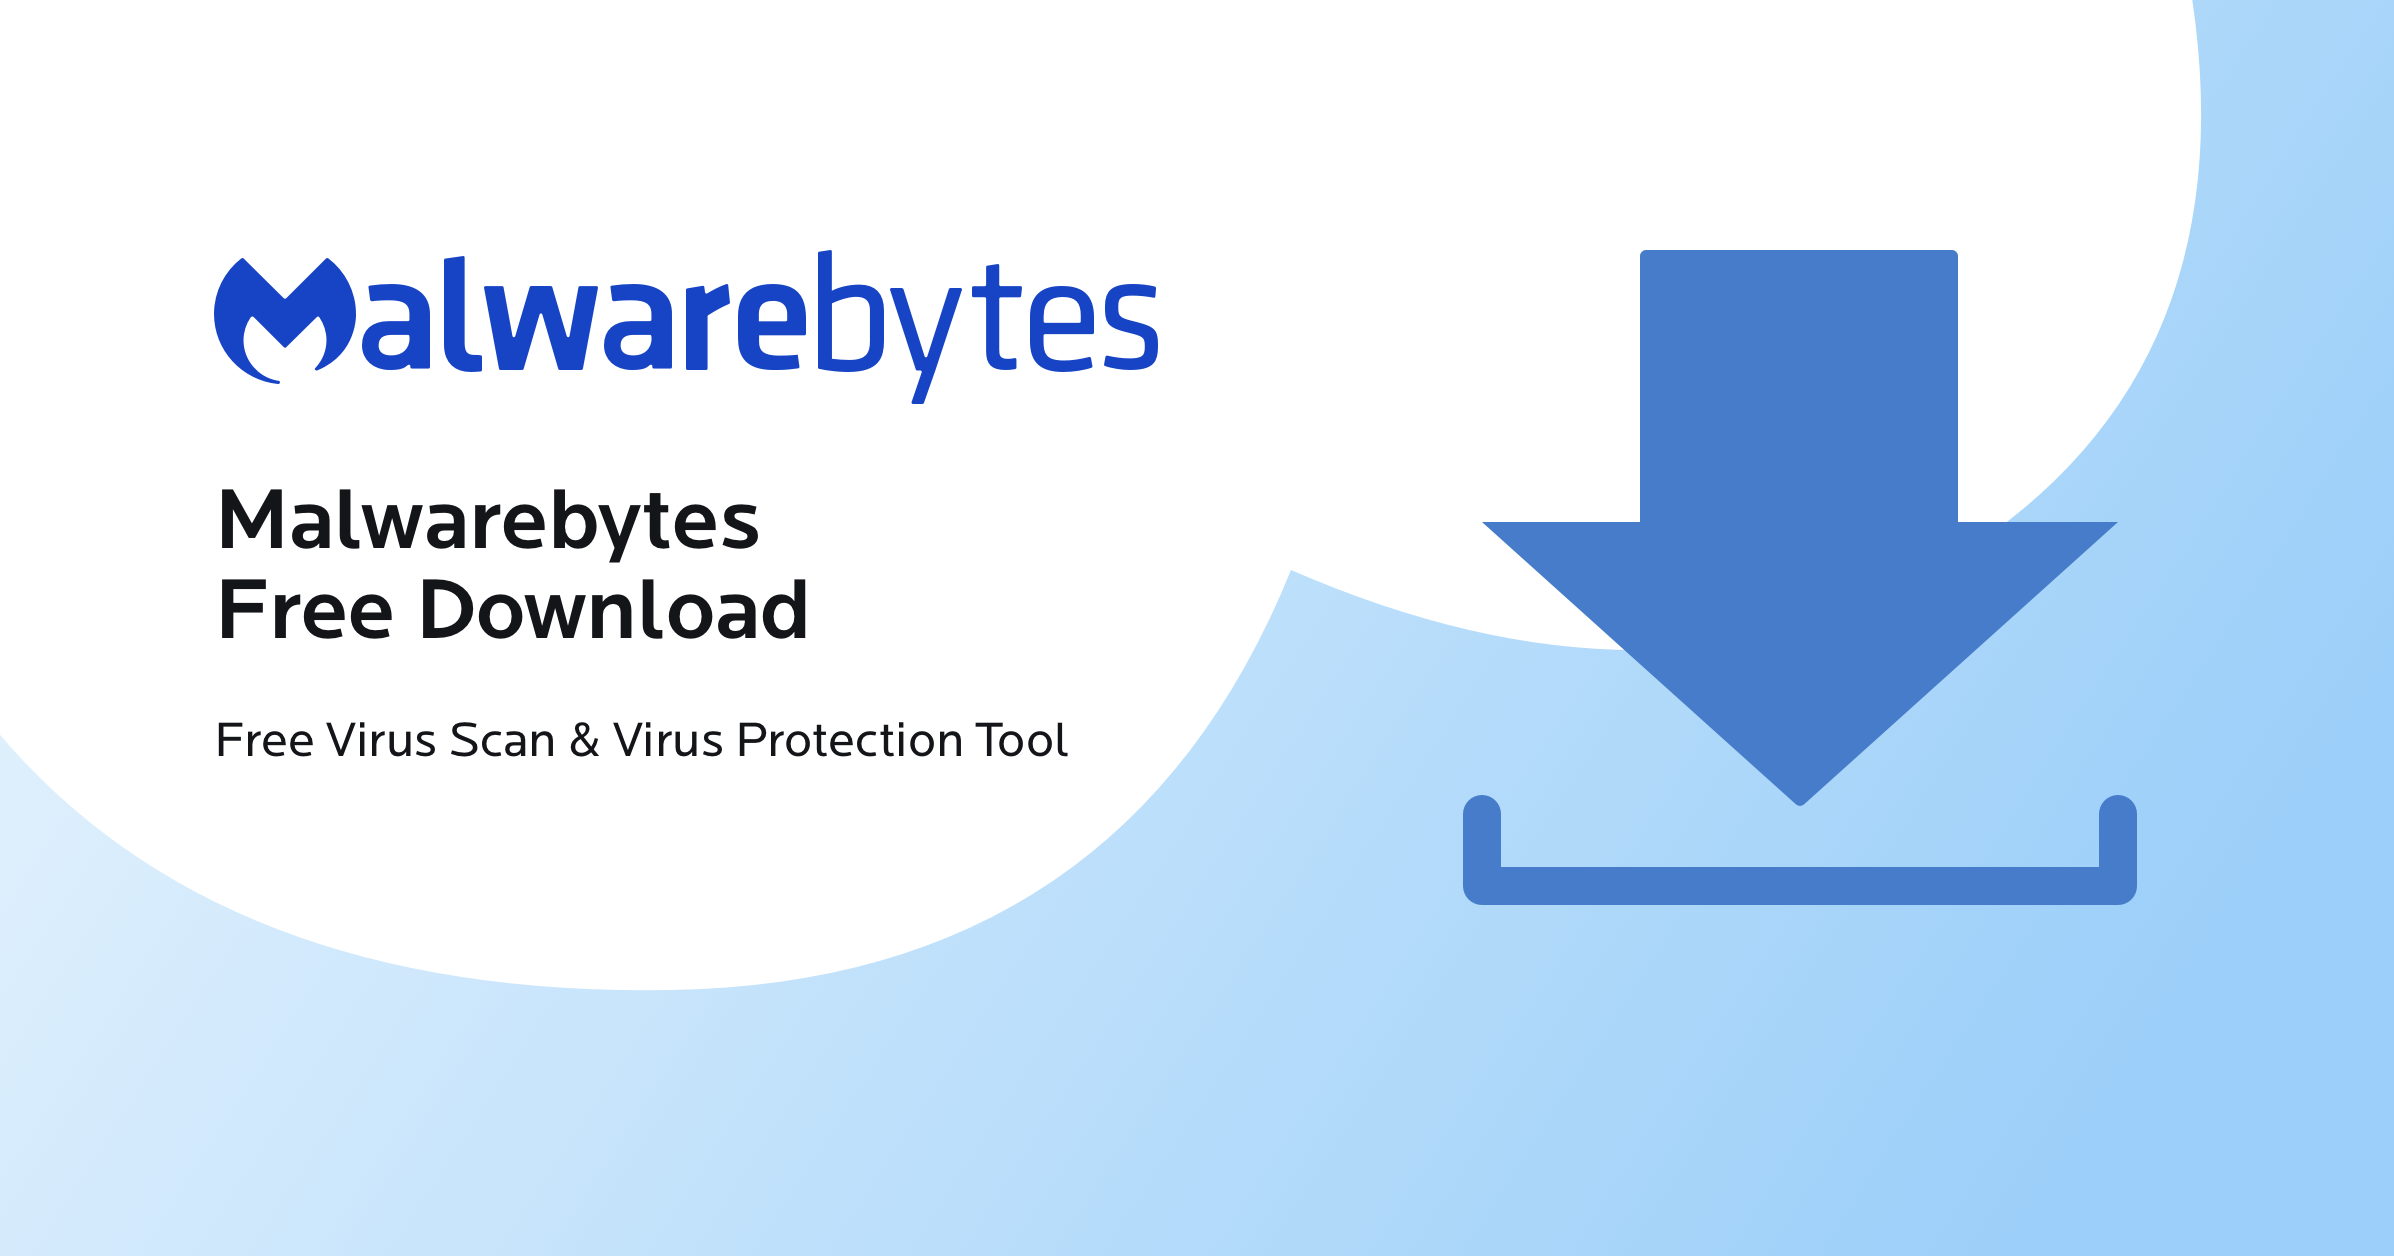 Download and install a reputable anti-malware program.
Update the anti-malware software to get the latest malware definitions.